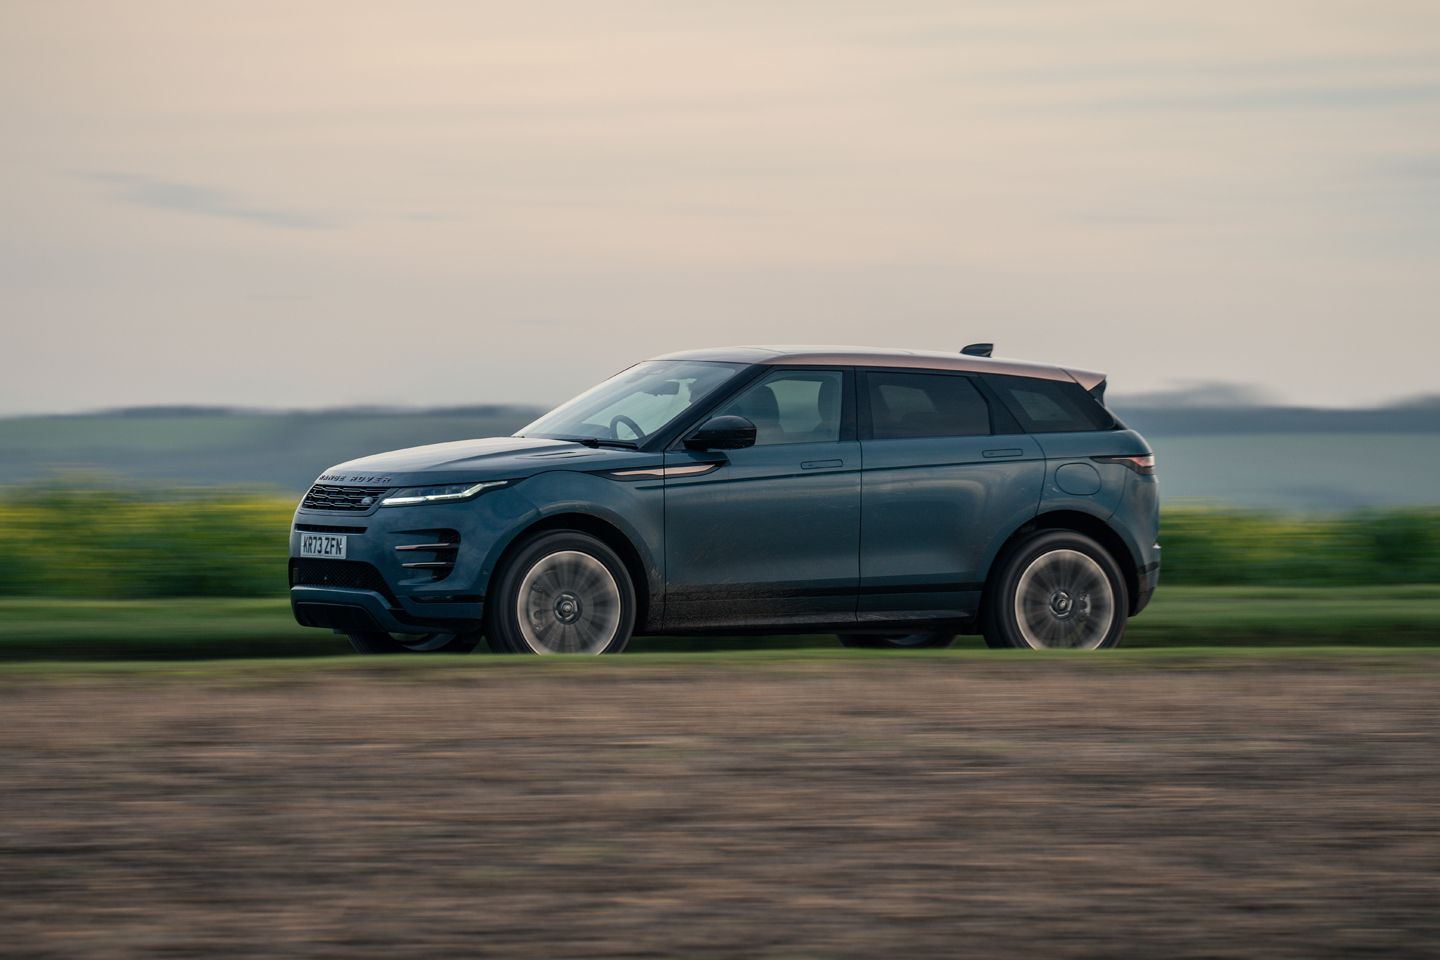 Range Rover Evoque Updated For 2024; Gets 11.4-Inch Touchscreen